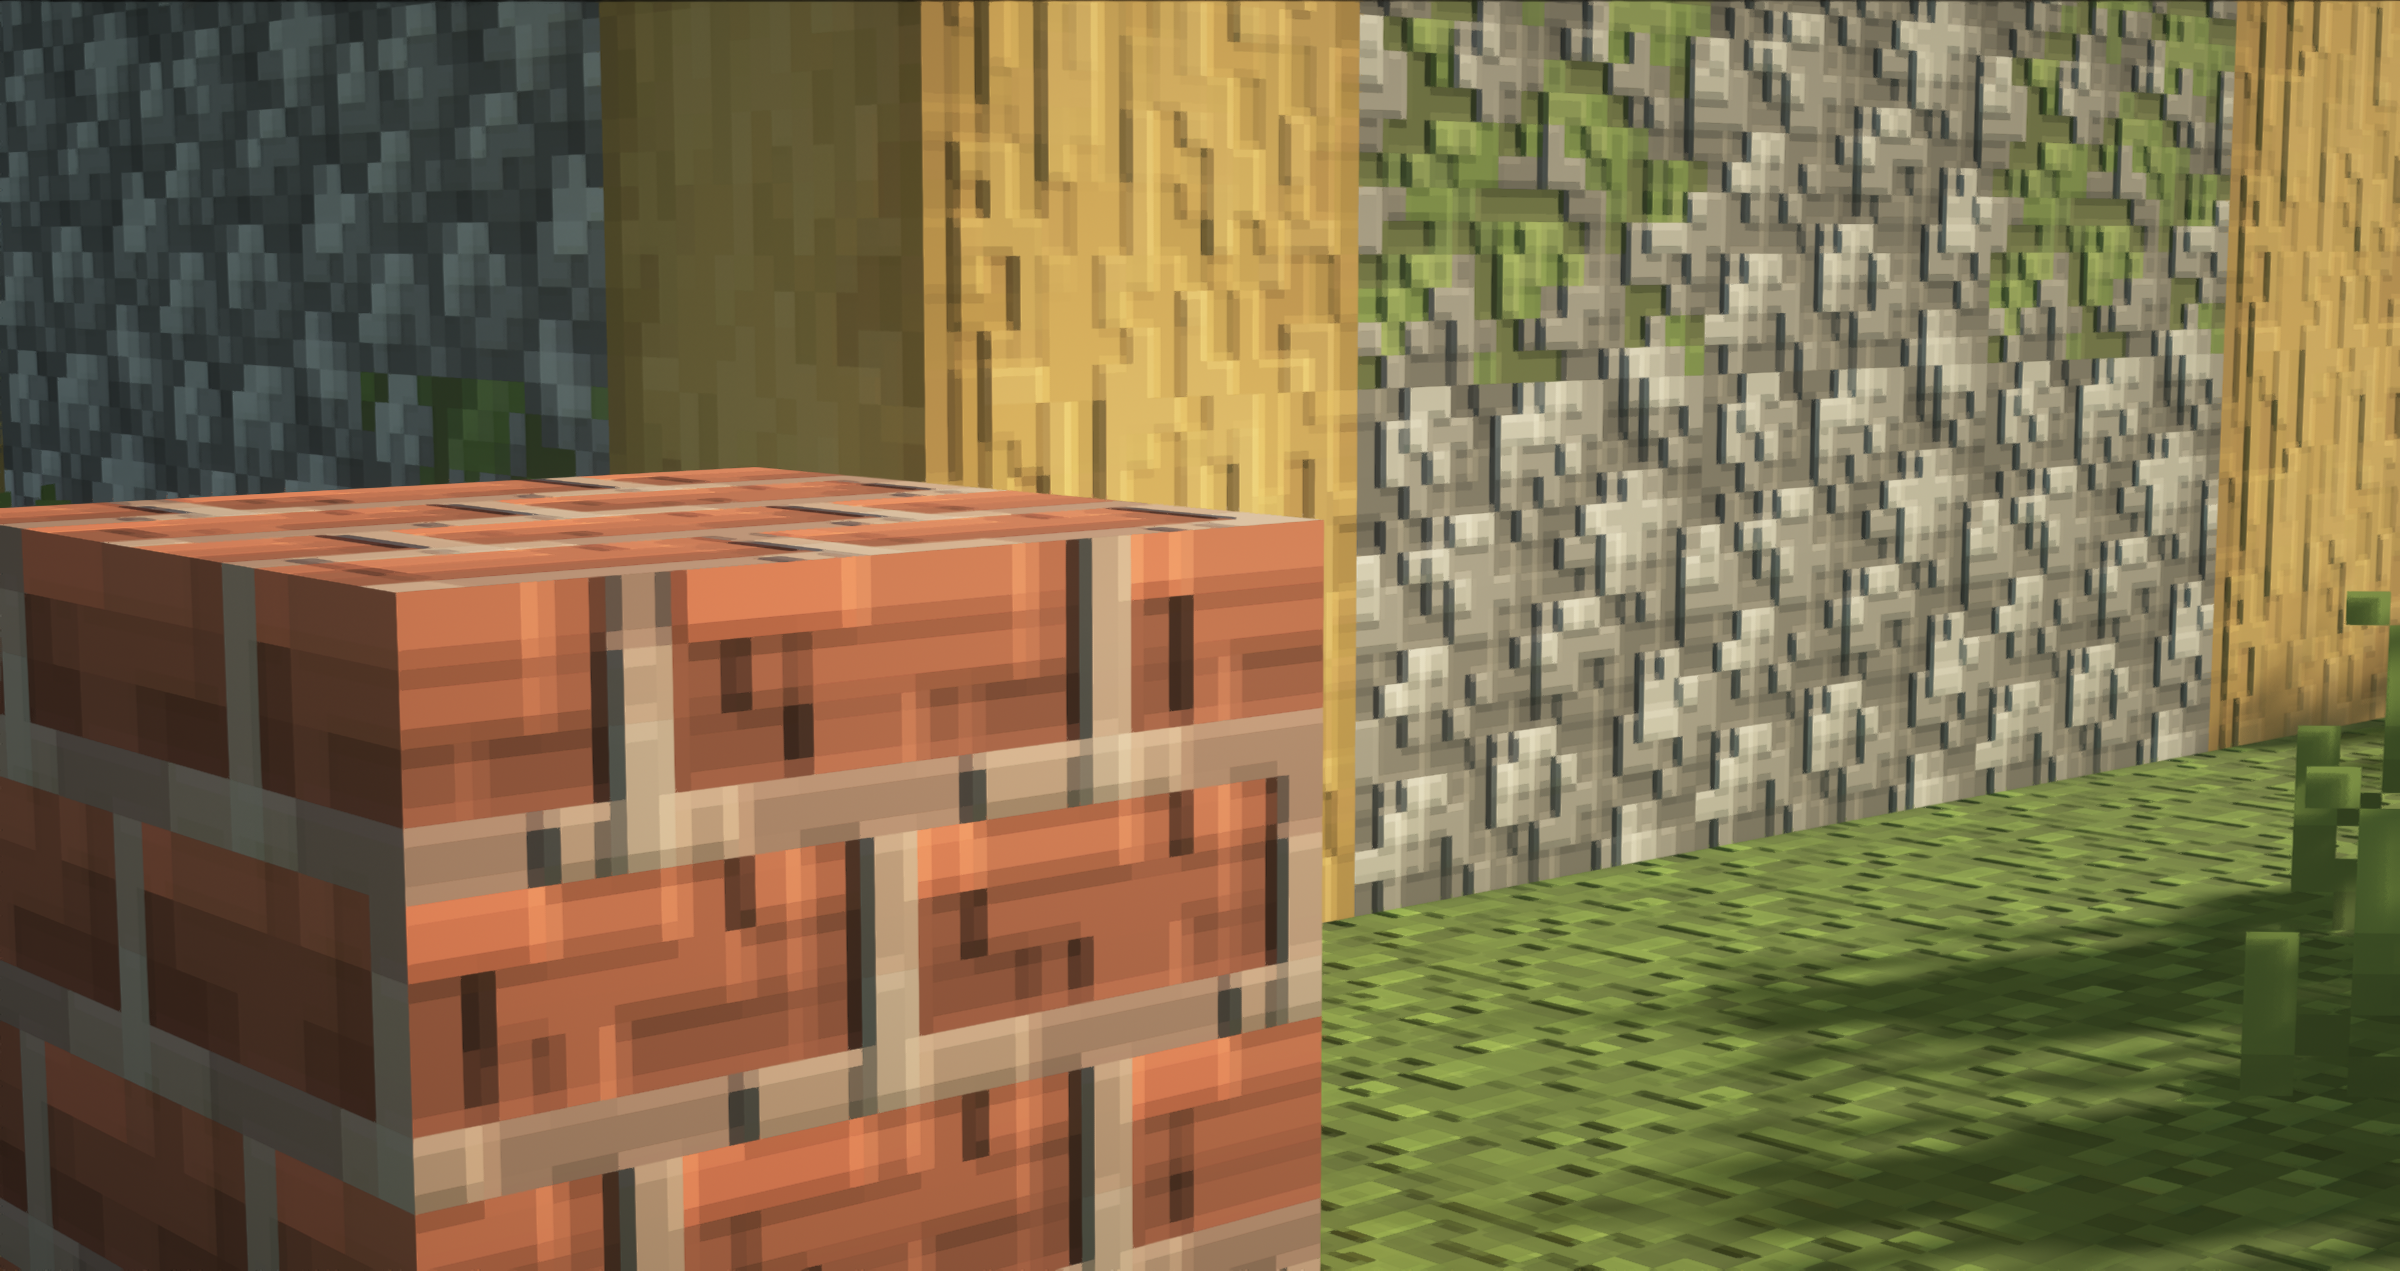 Texture packs for Minecraft 1.16, 1.16.1, 1.16.2, 1.16.3, 1.16.4, 1.16.5  Download